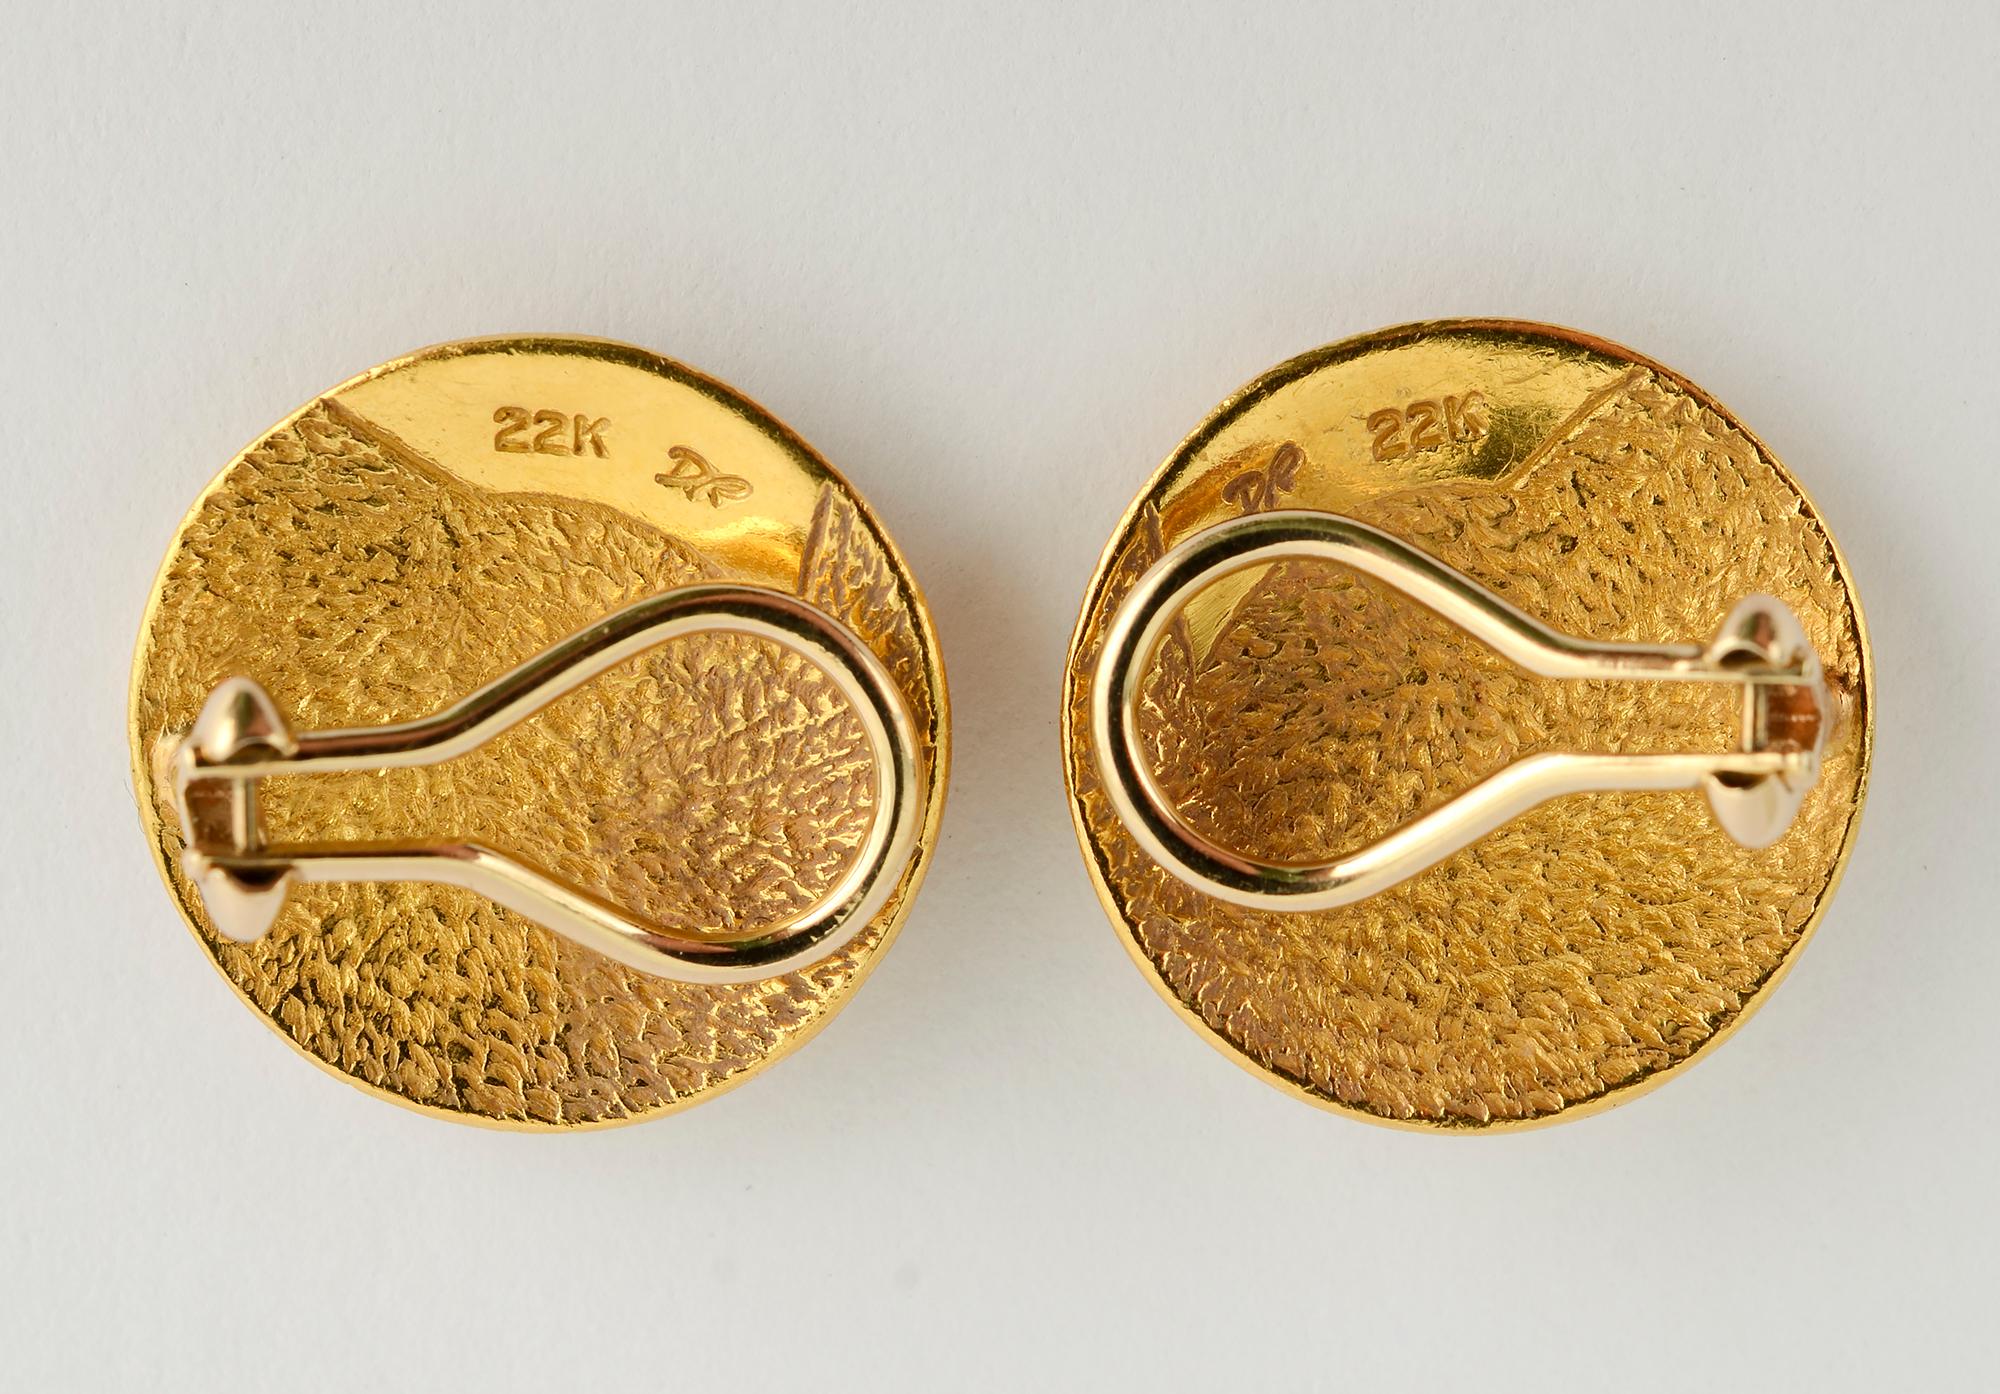 Modern Denise Roberge Gold Button Earrings with Coiled Design